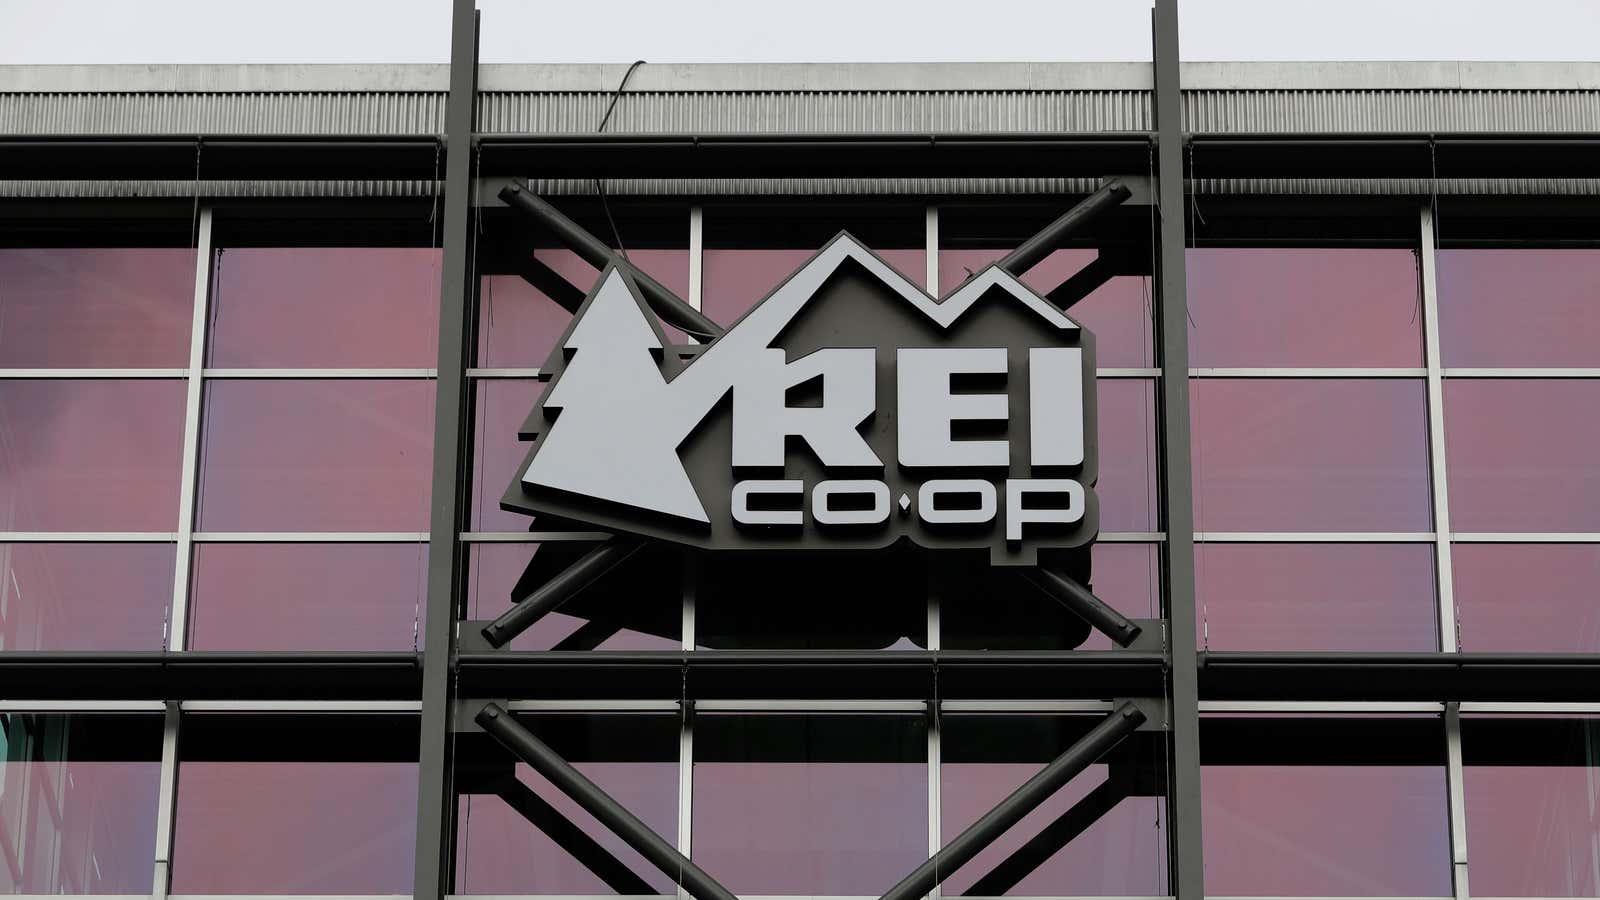 REI is serious about sustainability.